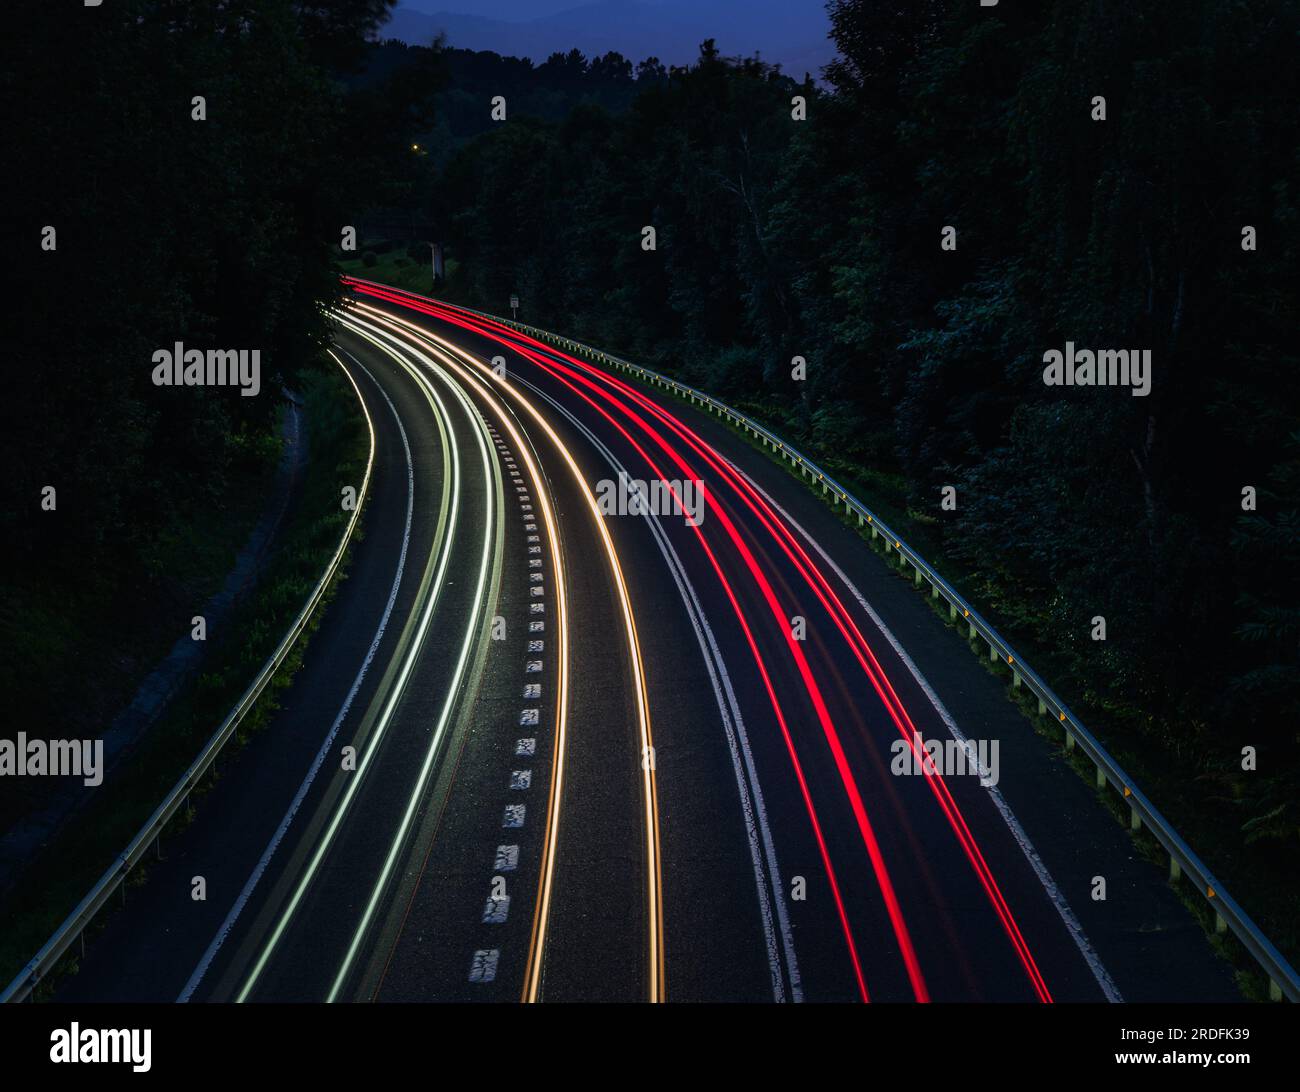 Photograph of car trails taken at blue hour in Unbe, Erandio (Bizkaia, Spain), with Olympus Live Composite mode. Stock Photo